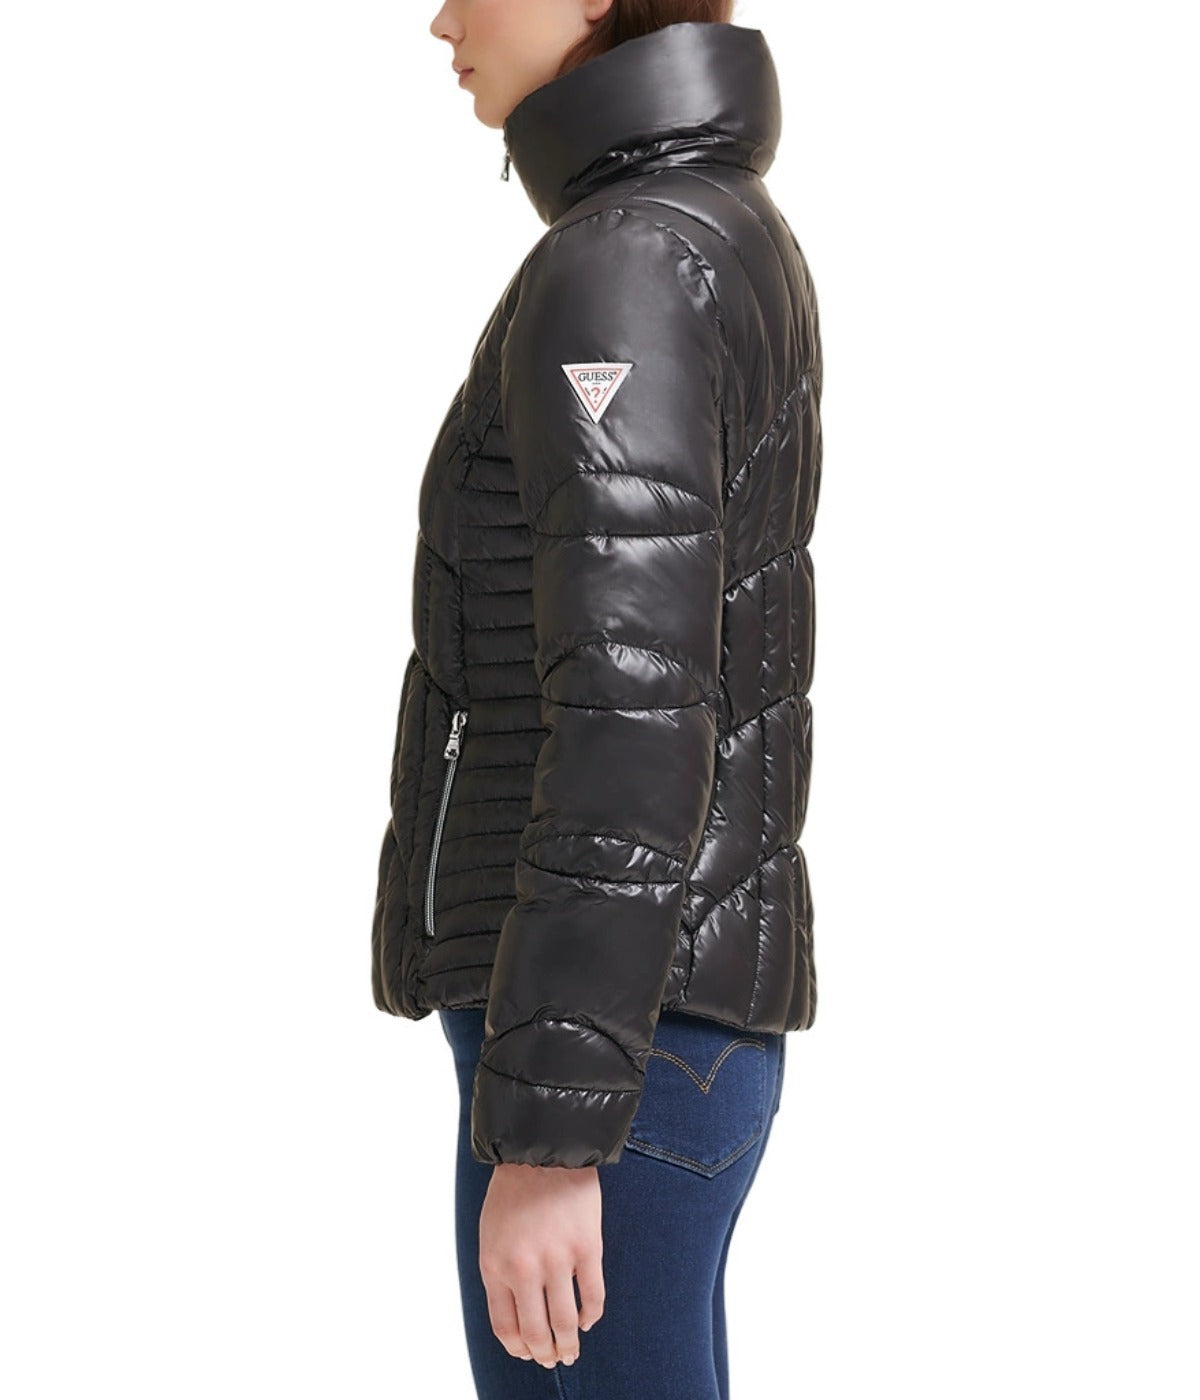 Quilted Puffer Jacket Black